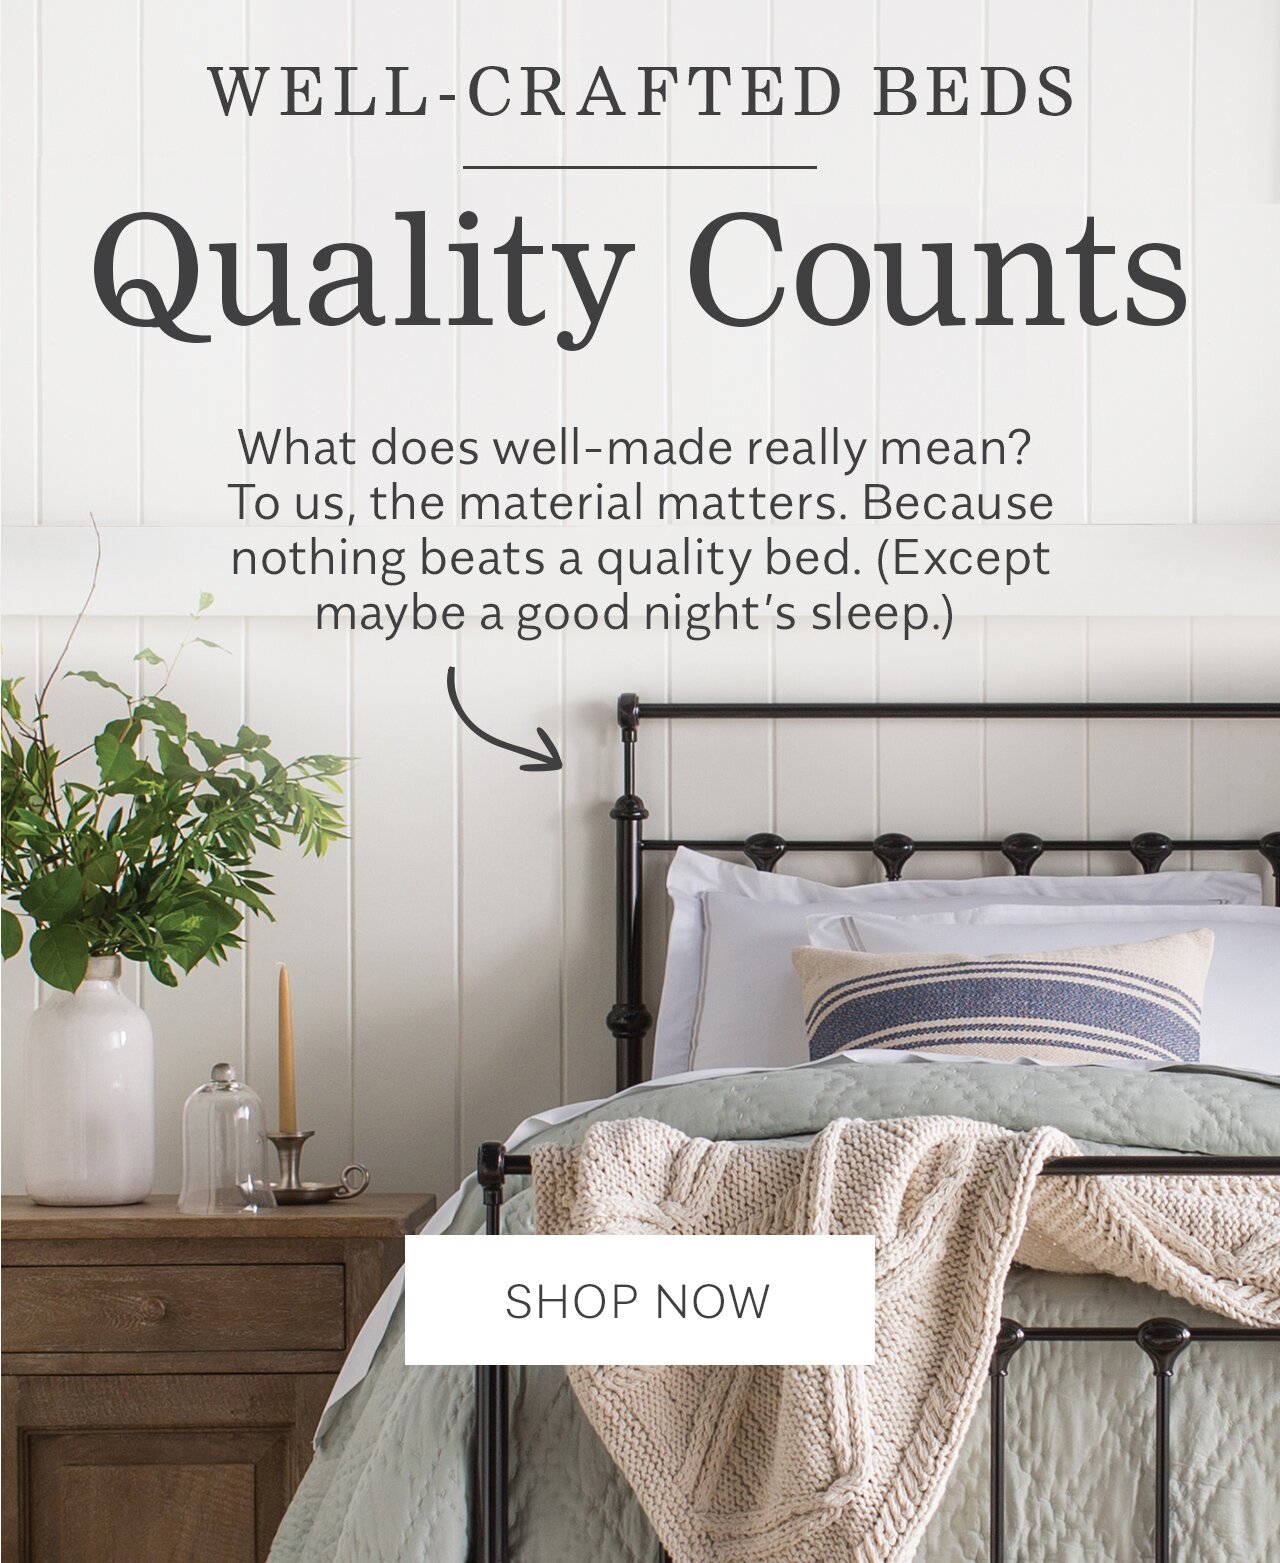 WELL-CRAFTED BEDS Quality Counts What does well-made really mean? To us, the material matters. Because nothing beats a quality bed. Except maybe a good night's sleep. 